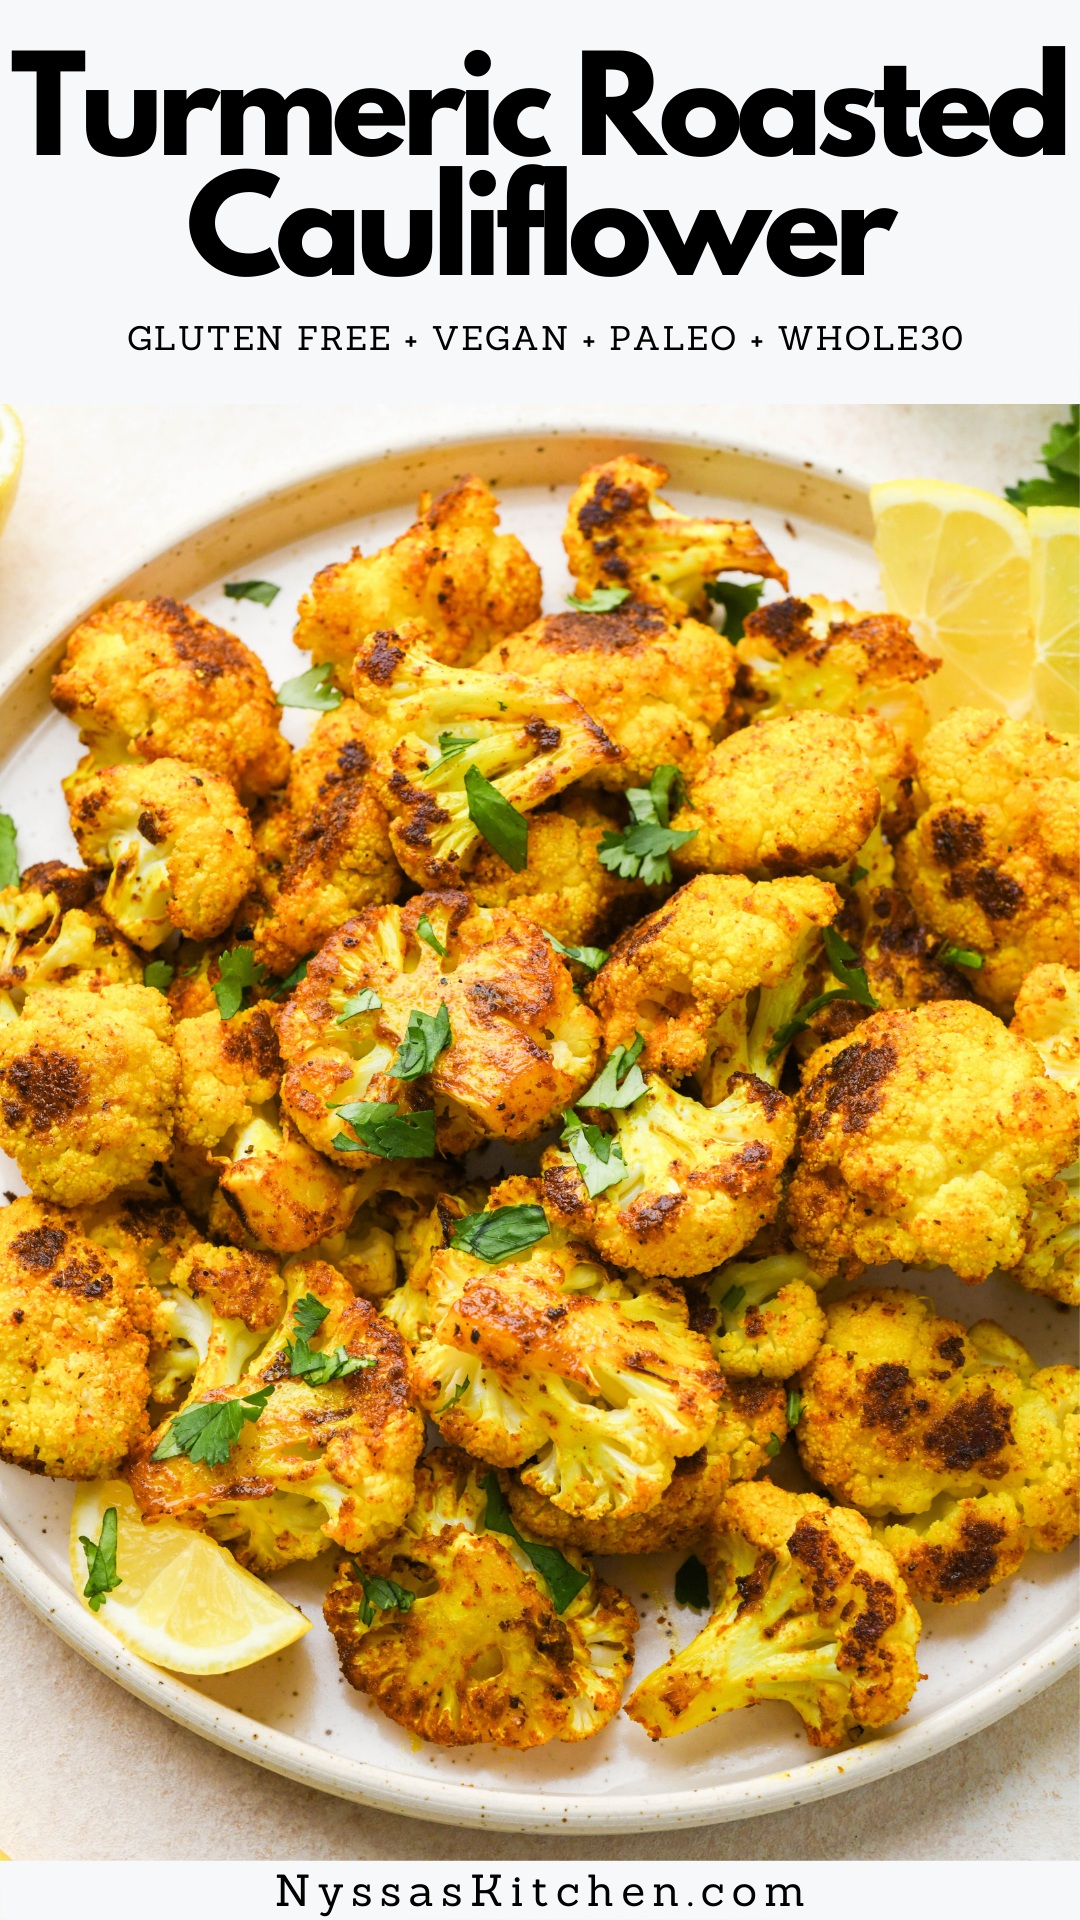 Turmeric roasted cauliflower is a vibrant, healthy veggie recipe that is bursting with flavor! Made with cauliflower florets and a simple spice blend, it's the perfect easy side for any meal. Easy to make and so delicious. Gluten free, vegan, dairy free, vegetarian, paleo, and Whole30 compatible.